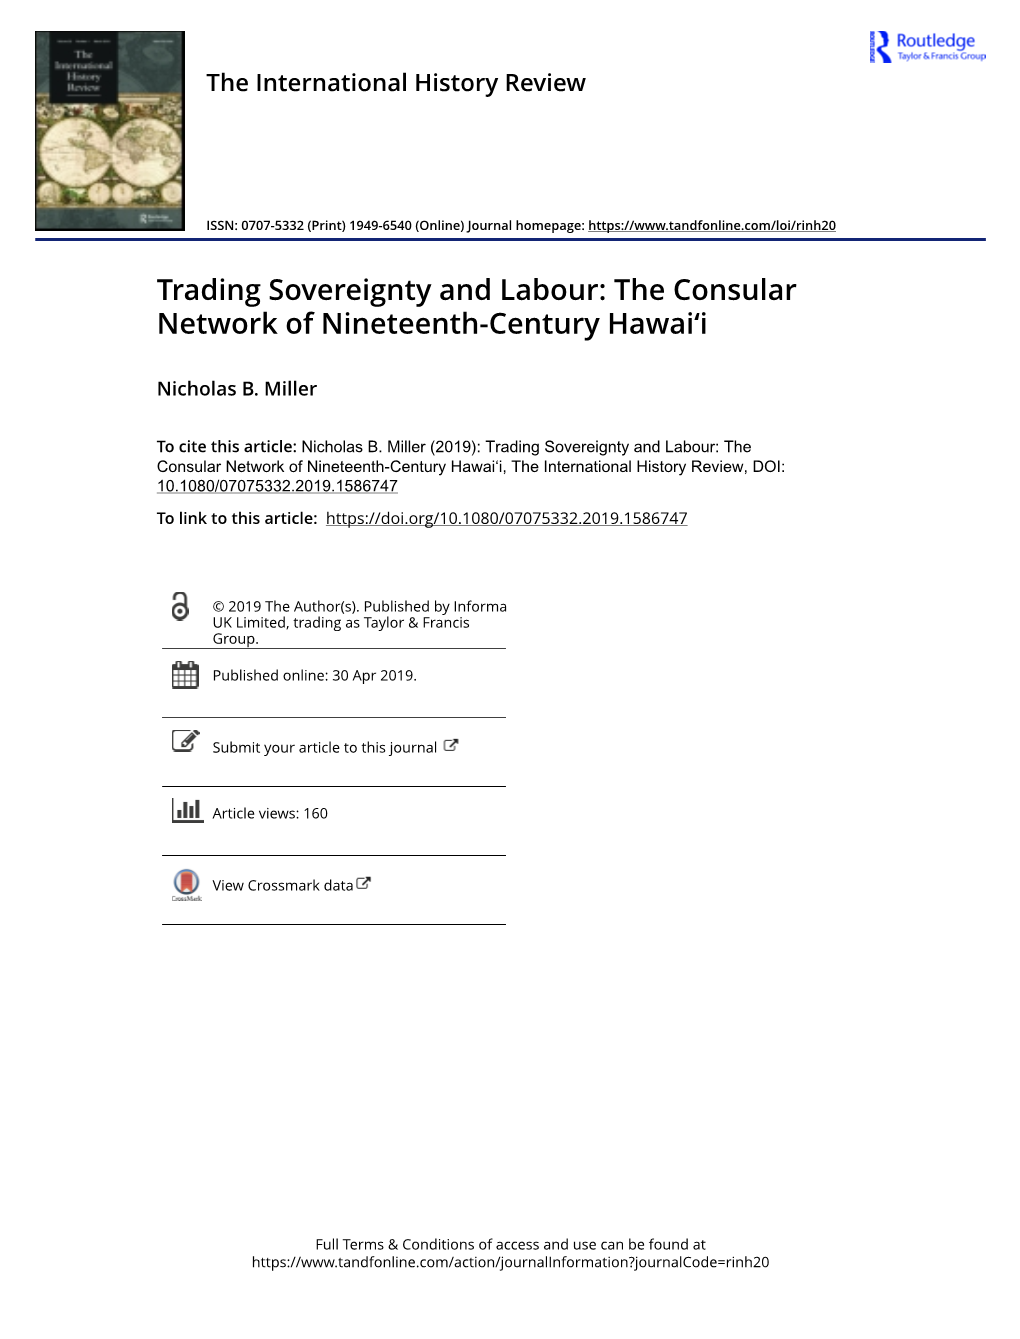 Trading Sovereignty and Labour: the Consular Network of Nineteenth-Century Hawai'i